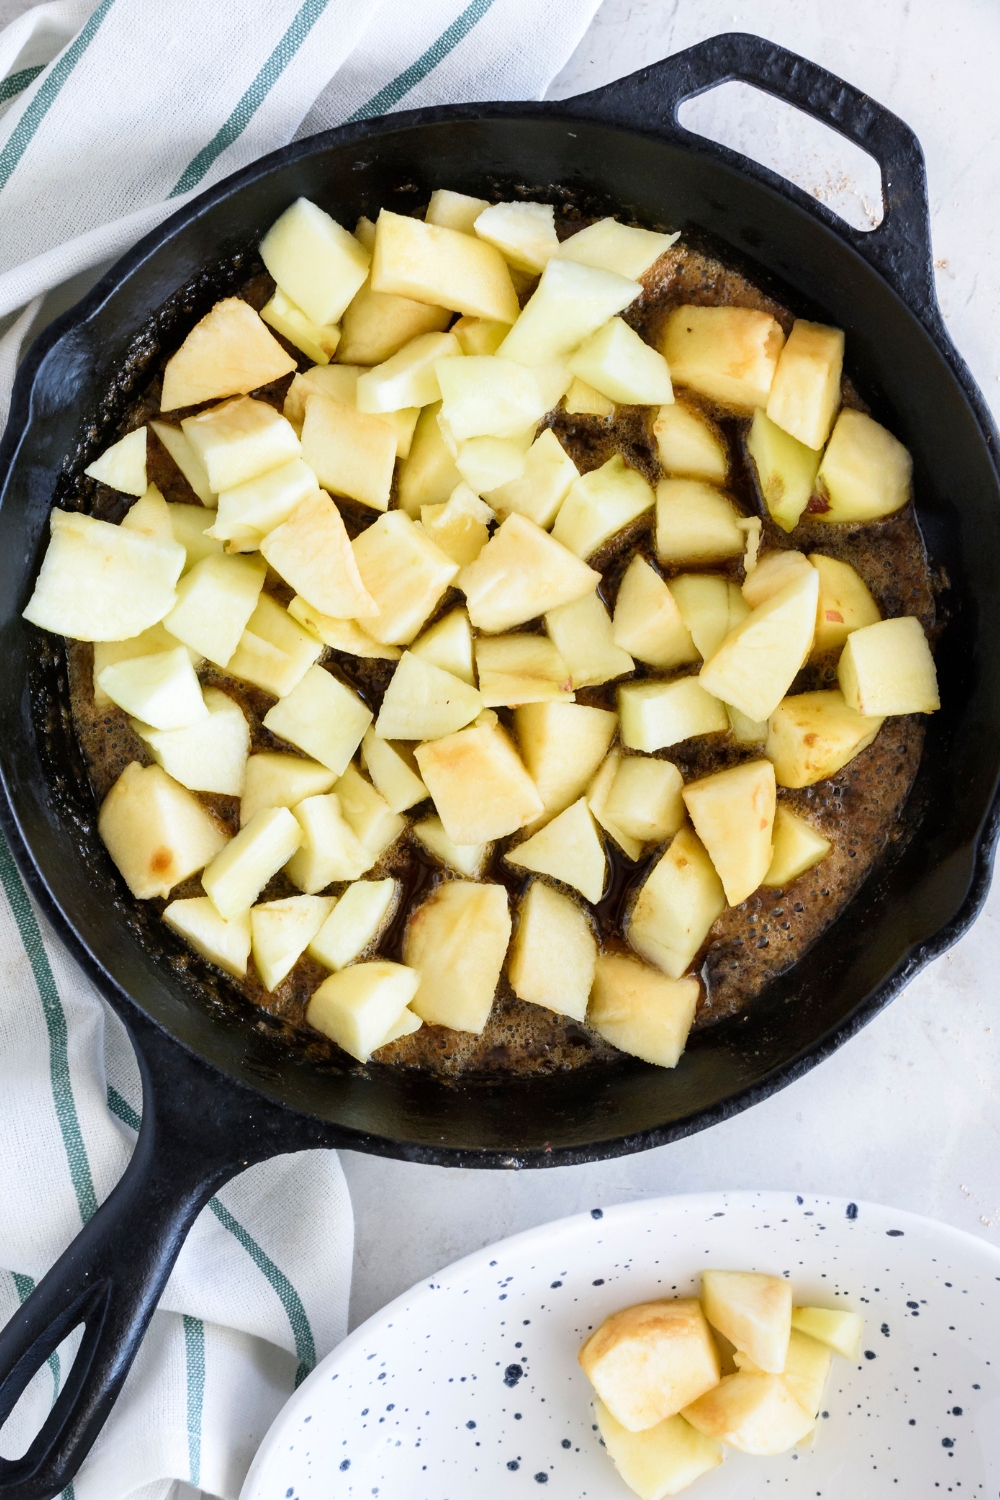 A cast iron skillet frying apples with a cinnamon sugar butter sauce.